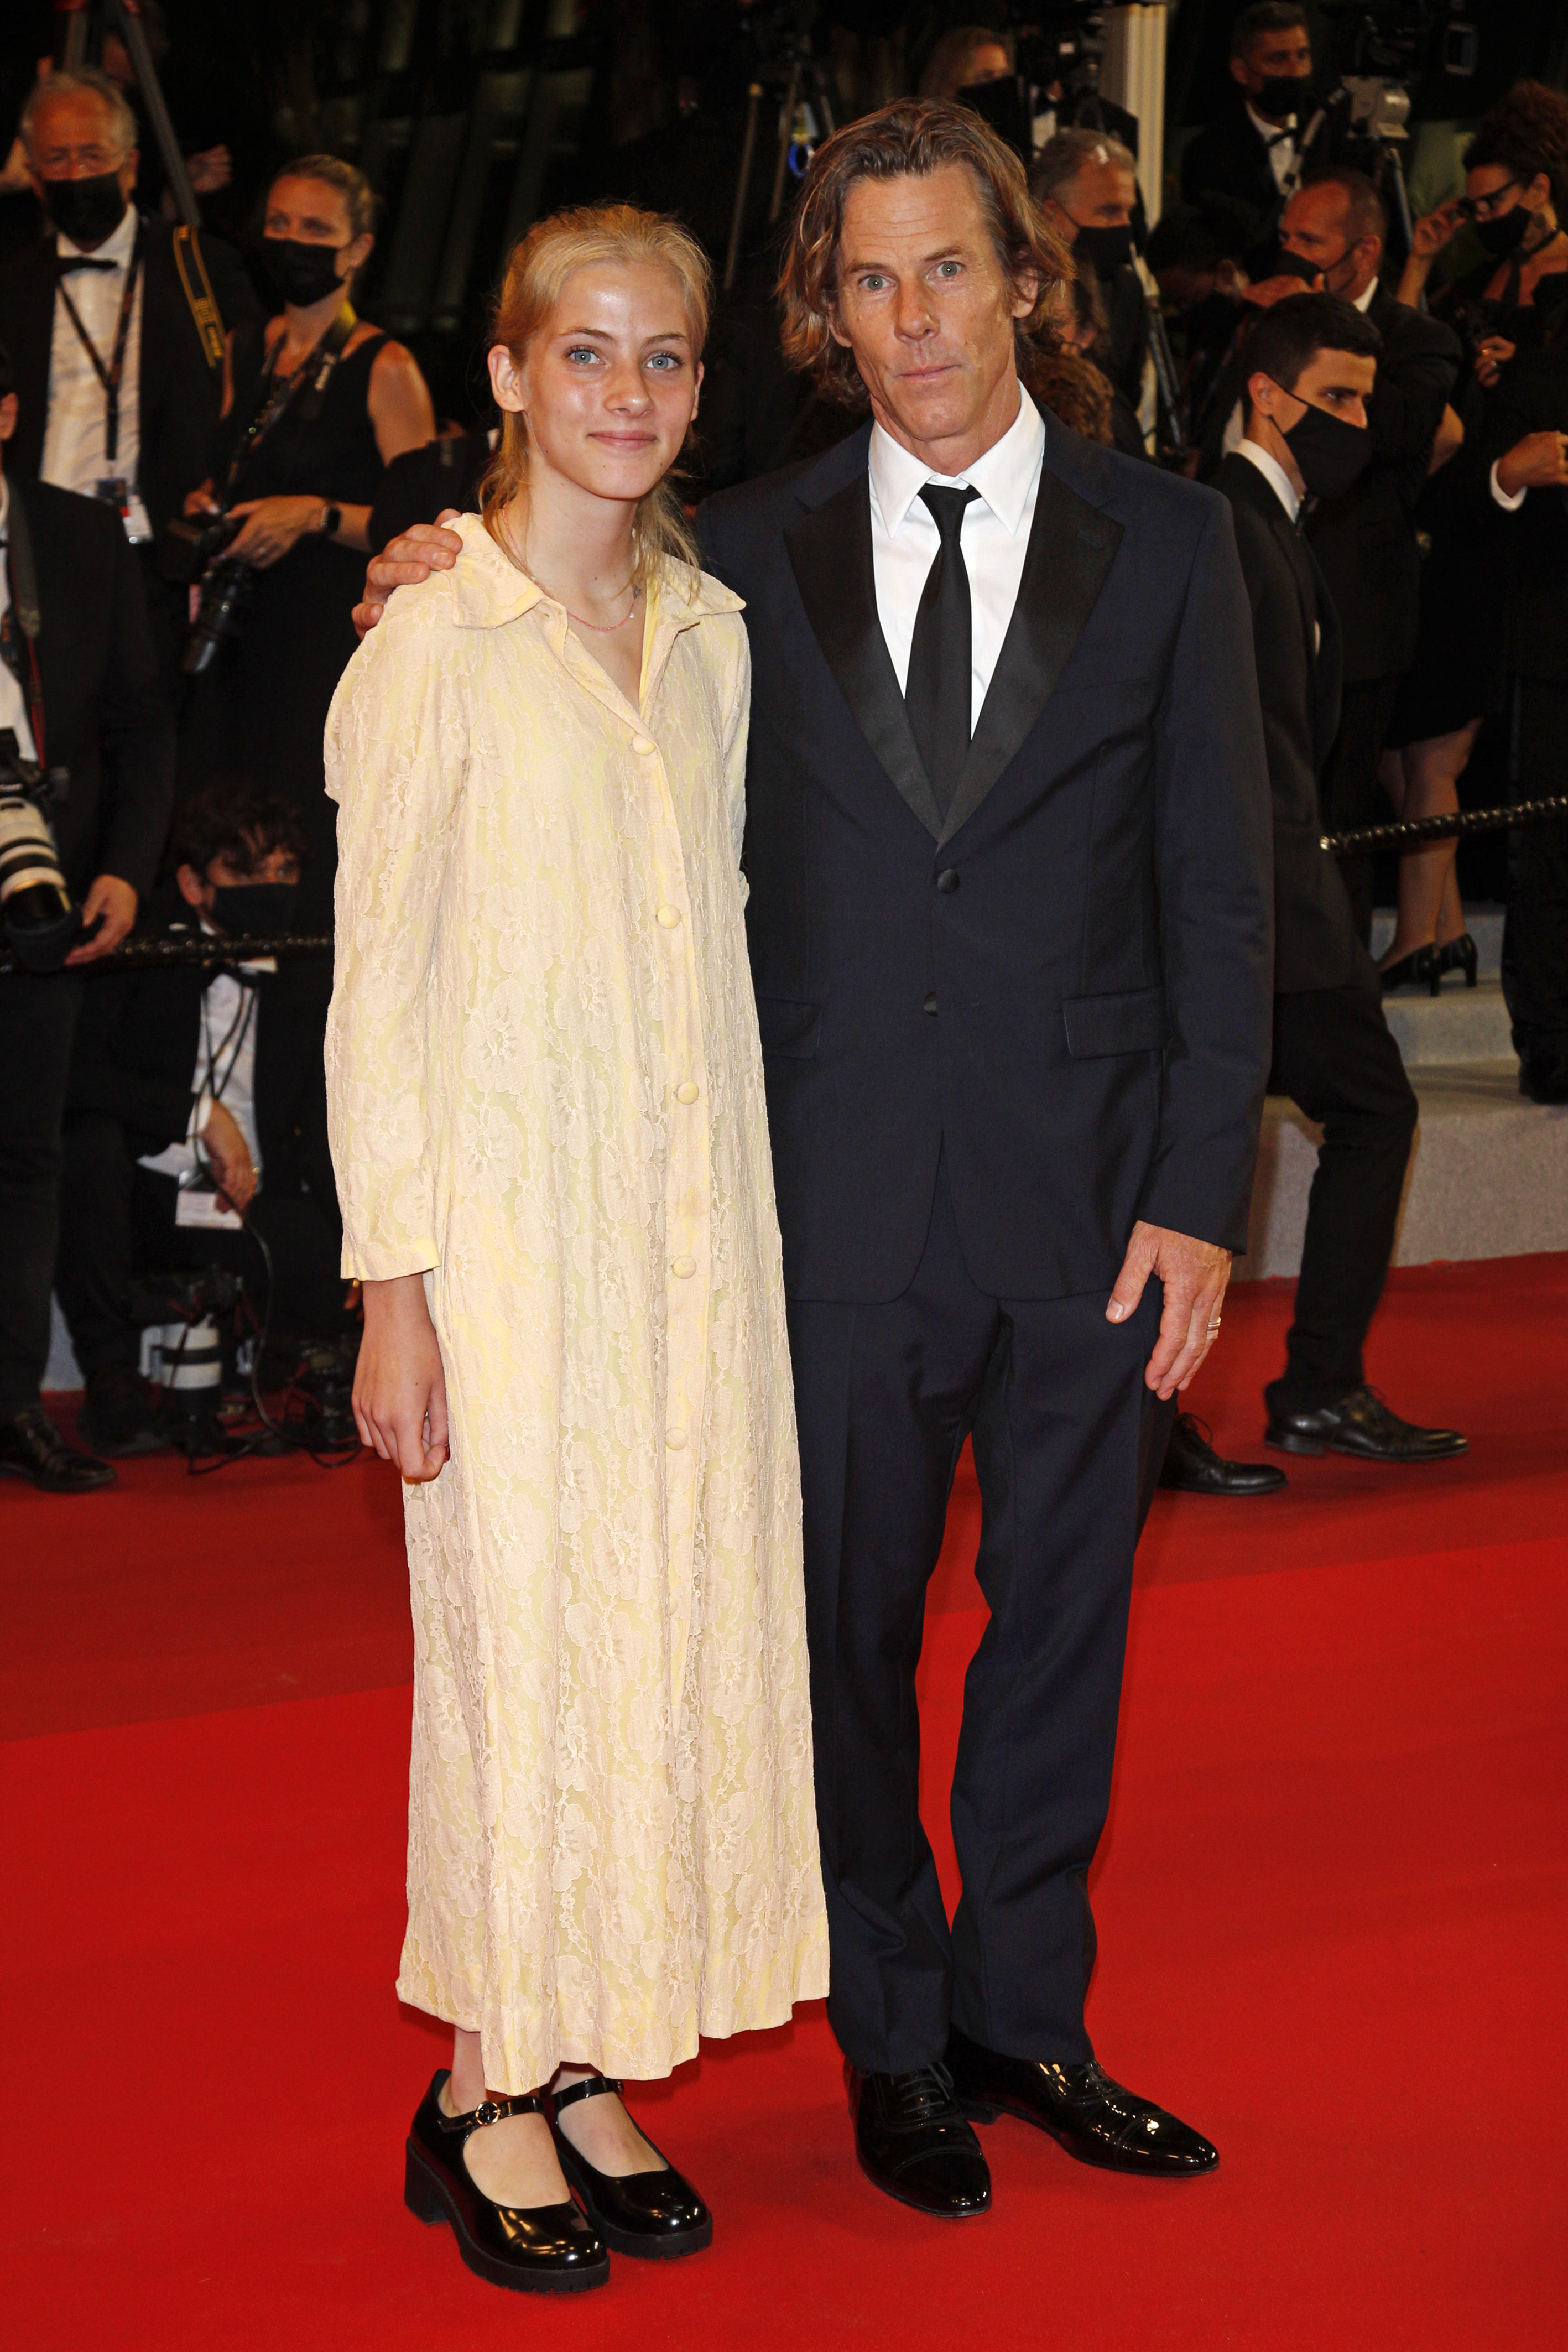 Hazel and Danny Moder at the 74th Cannes Film Festival on July 10, 2021 | Source: Getty Images